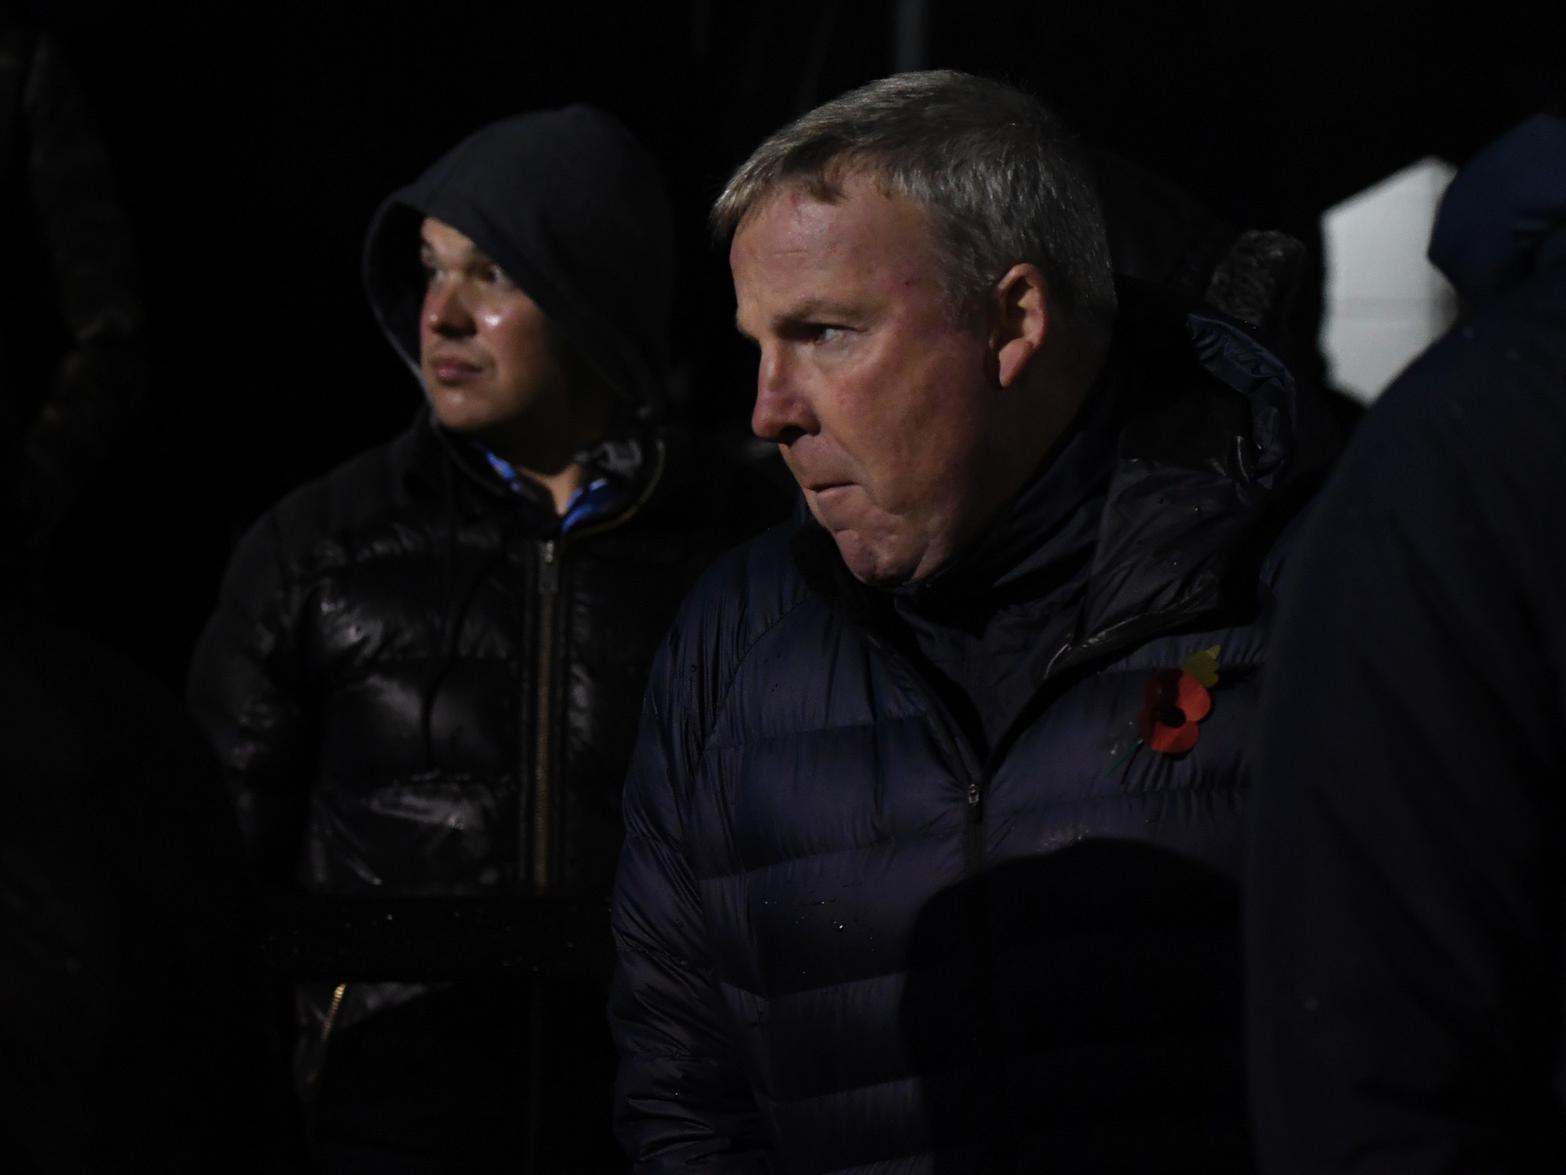 Kenny Jackett still feels he needs reinforcements in defensive areas. (The News)